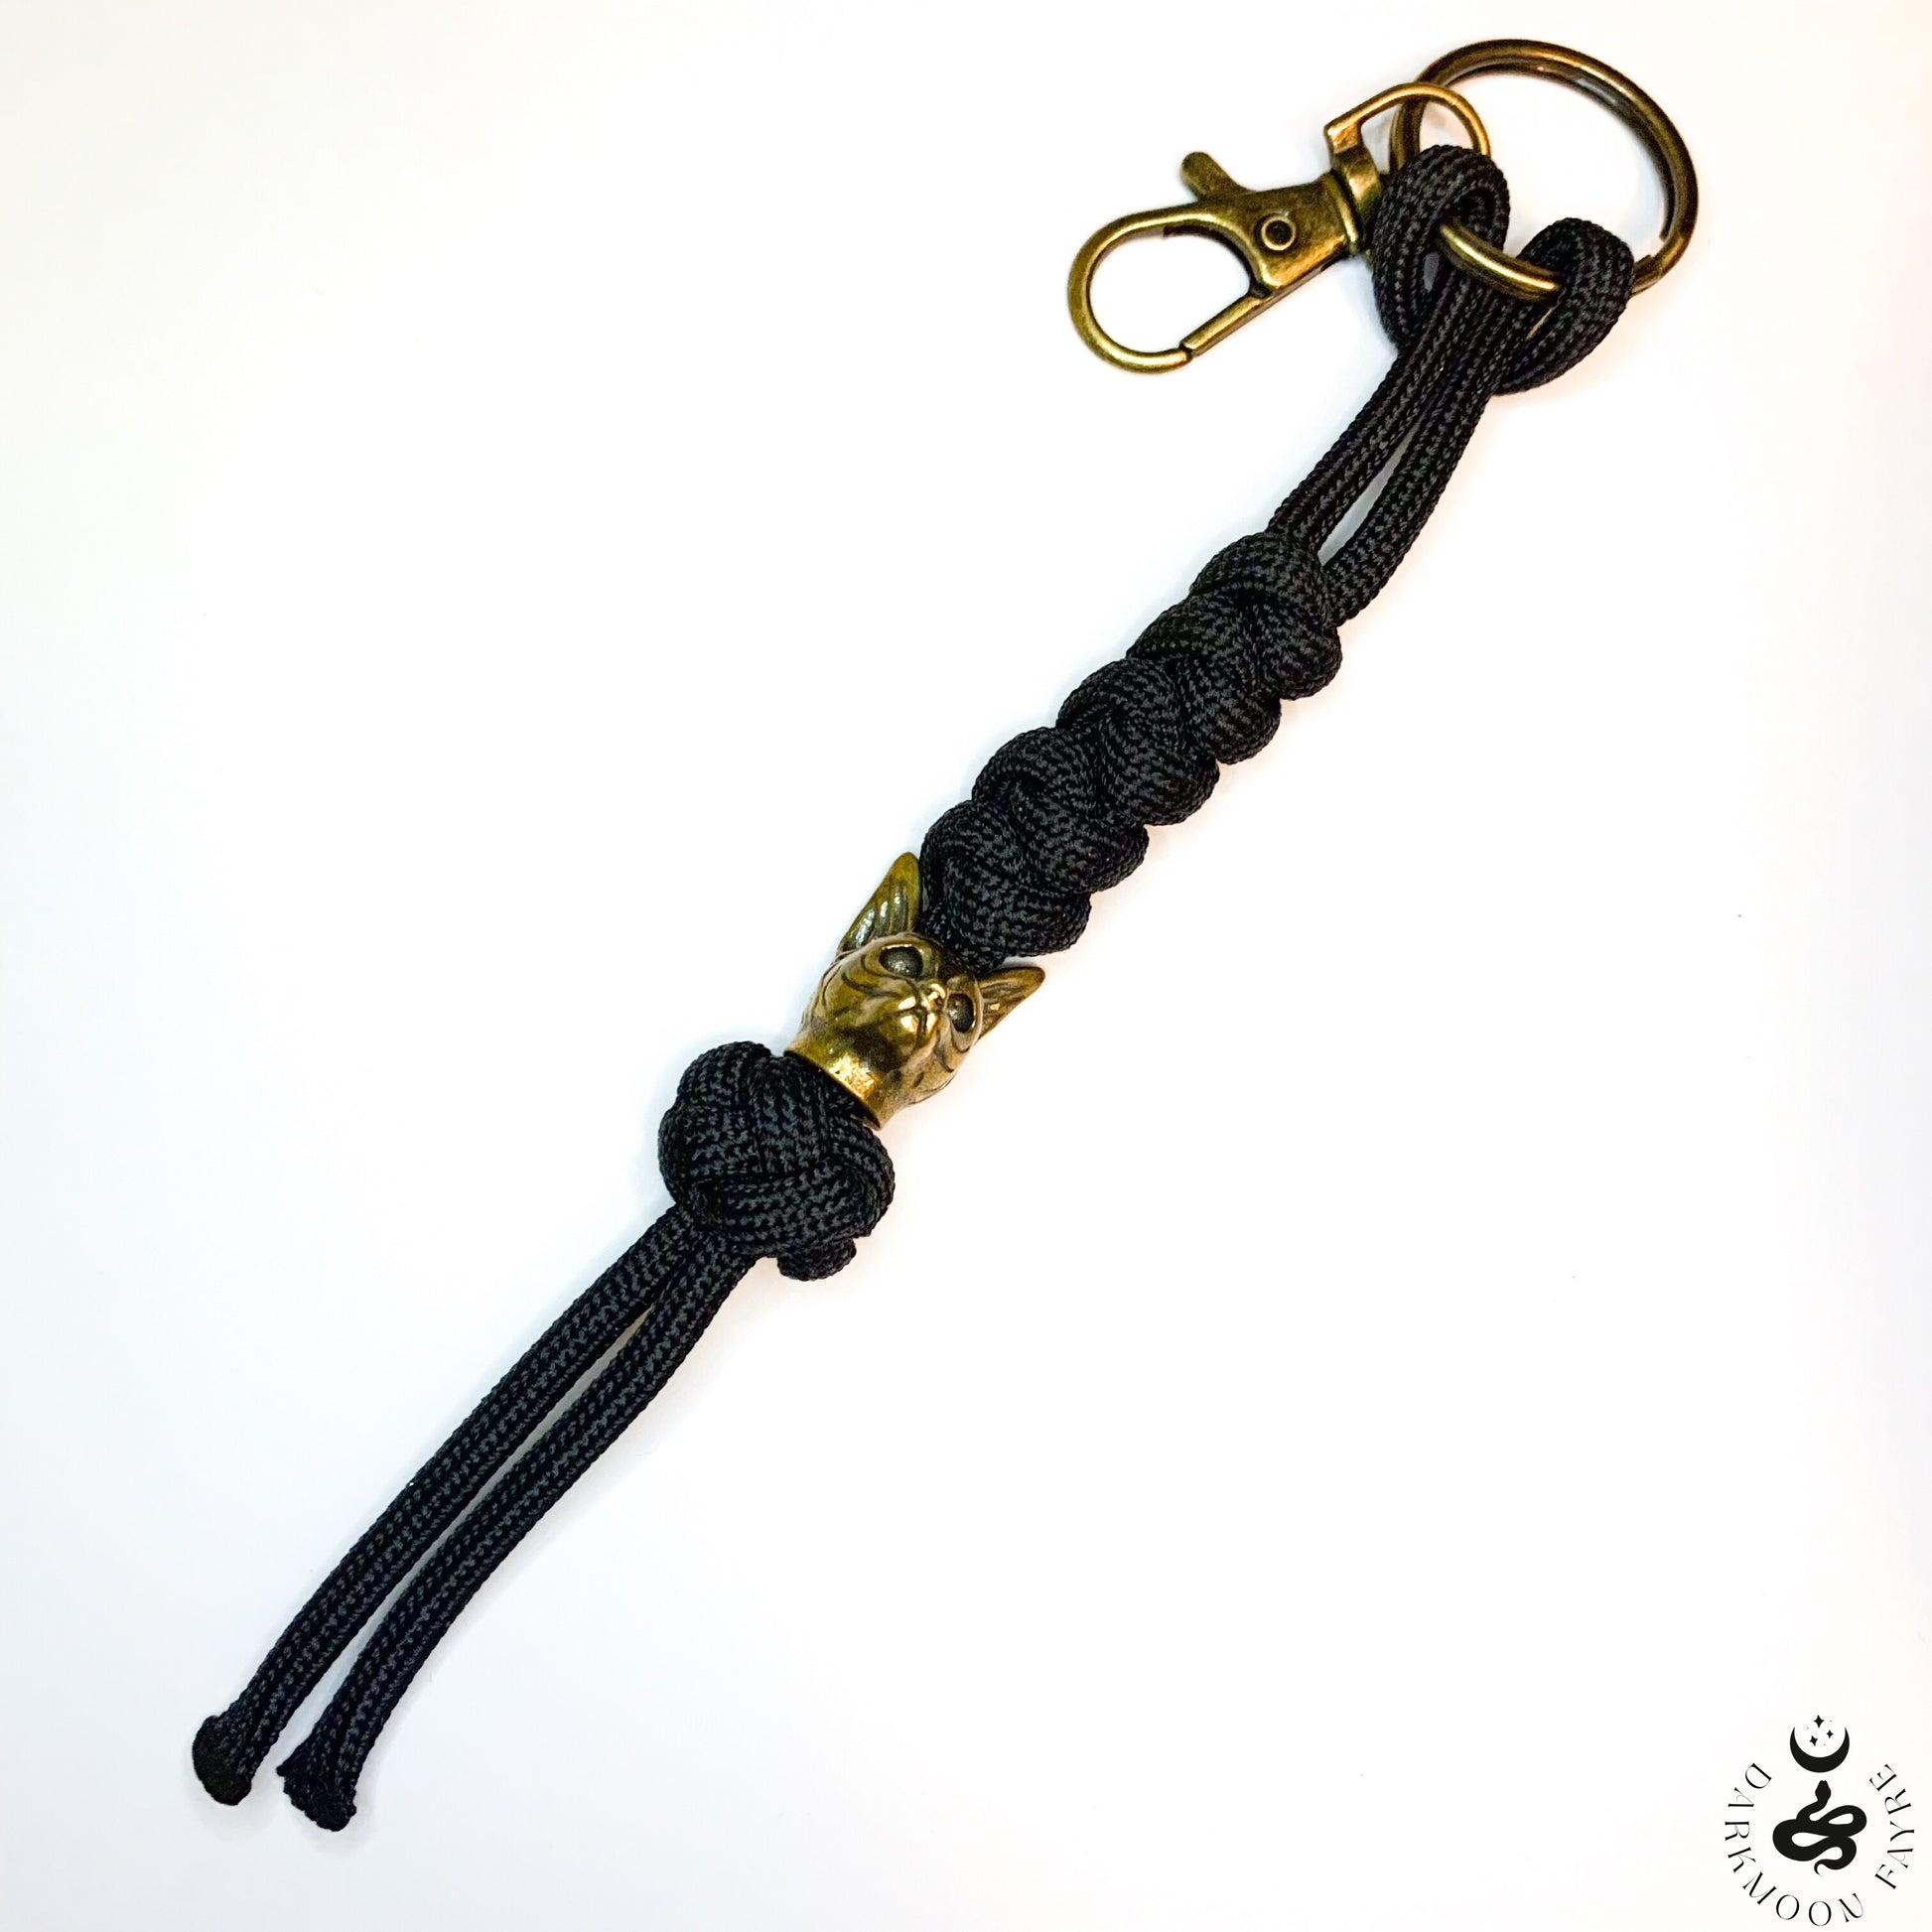 Japanese Netsuke Style Cat Keyring In Antiqued Bronze, can also be used as a zipper pull, knife lanyard, bag or boot charm - Darkmoon Fayre